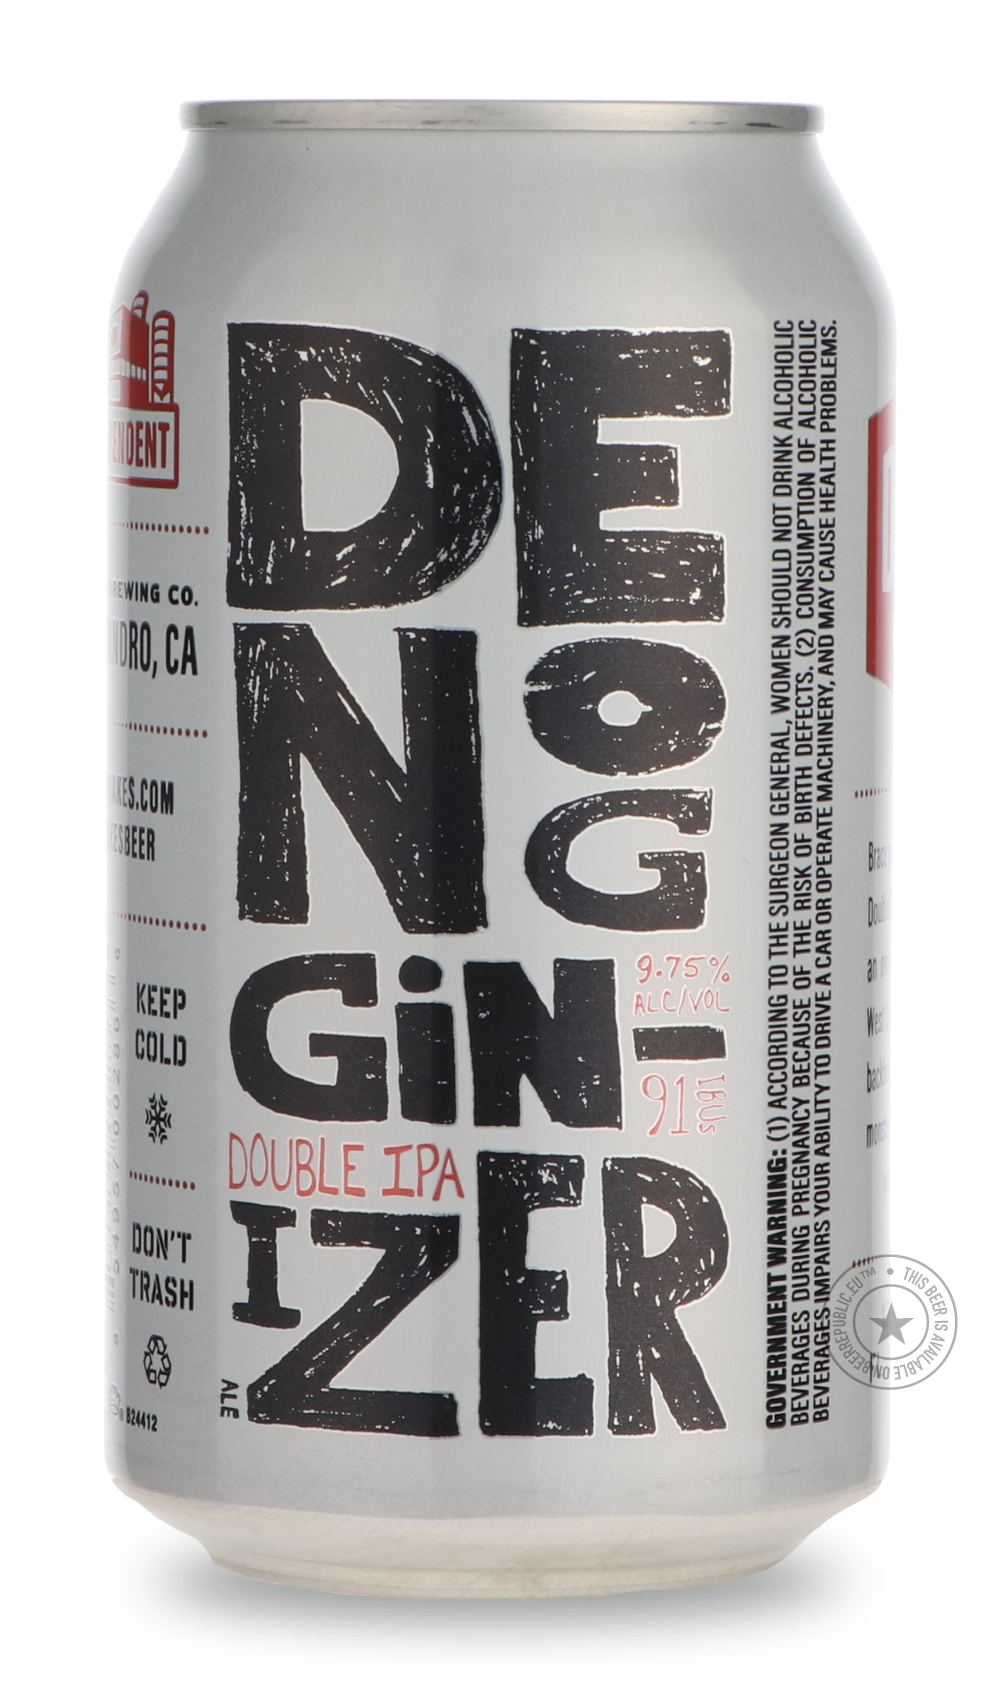 -Drake's- Denogginizer-IPA- Only @ Beer Republic - The best online beer store for American & Canadian craft beer - Buy beer online from the USA and Canada - Bier online kopen - Amerikaans bier kopen - Craft beer store - Craft beer kopen - Amerikanisch bier kaufen - Bier online kaufen - Acheter biere online - IPA - Stout - Porter - New England IPA - Hazy IPA - Imperial Stout - Barrel Aged - Barrel Aged Imperial Stout - Brown - Dark beer - Blond - Blonde - Pilsner - Lager - Wheat - Weizen - Amber - Barley Win